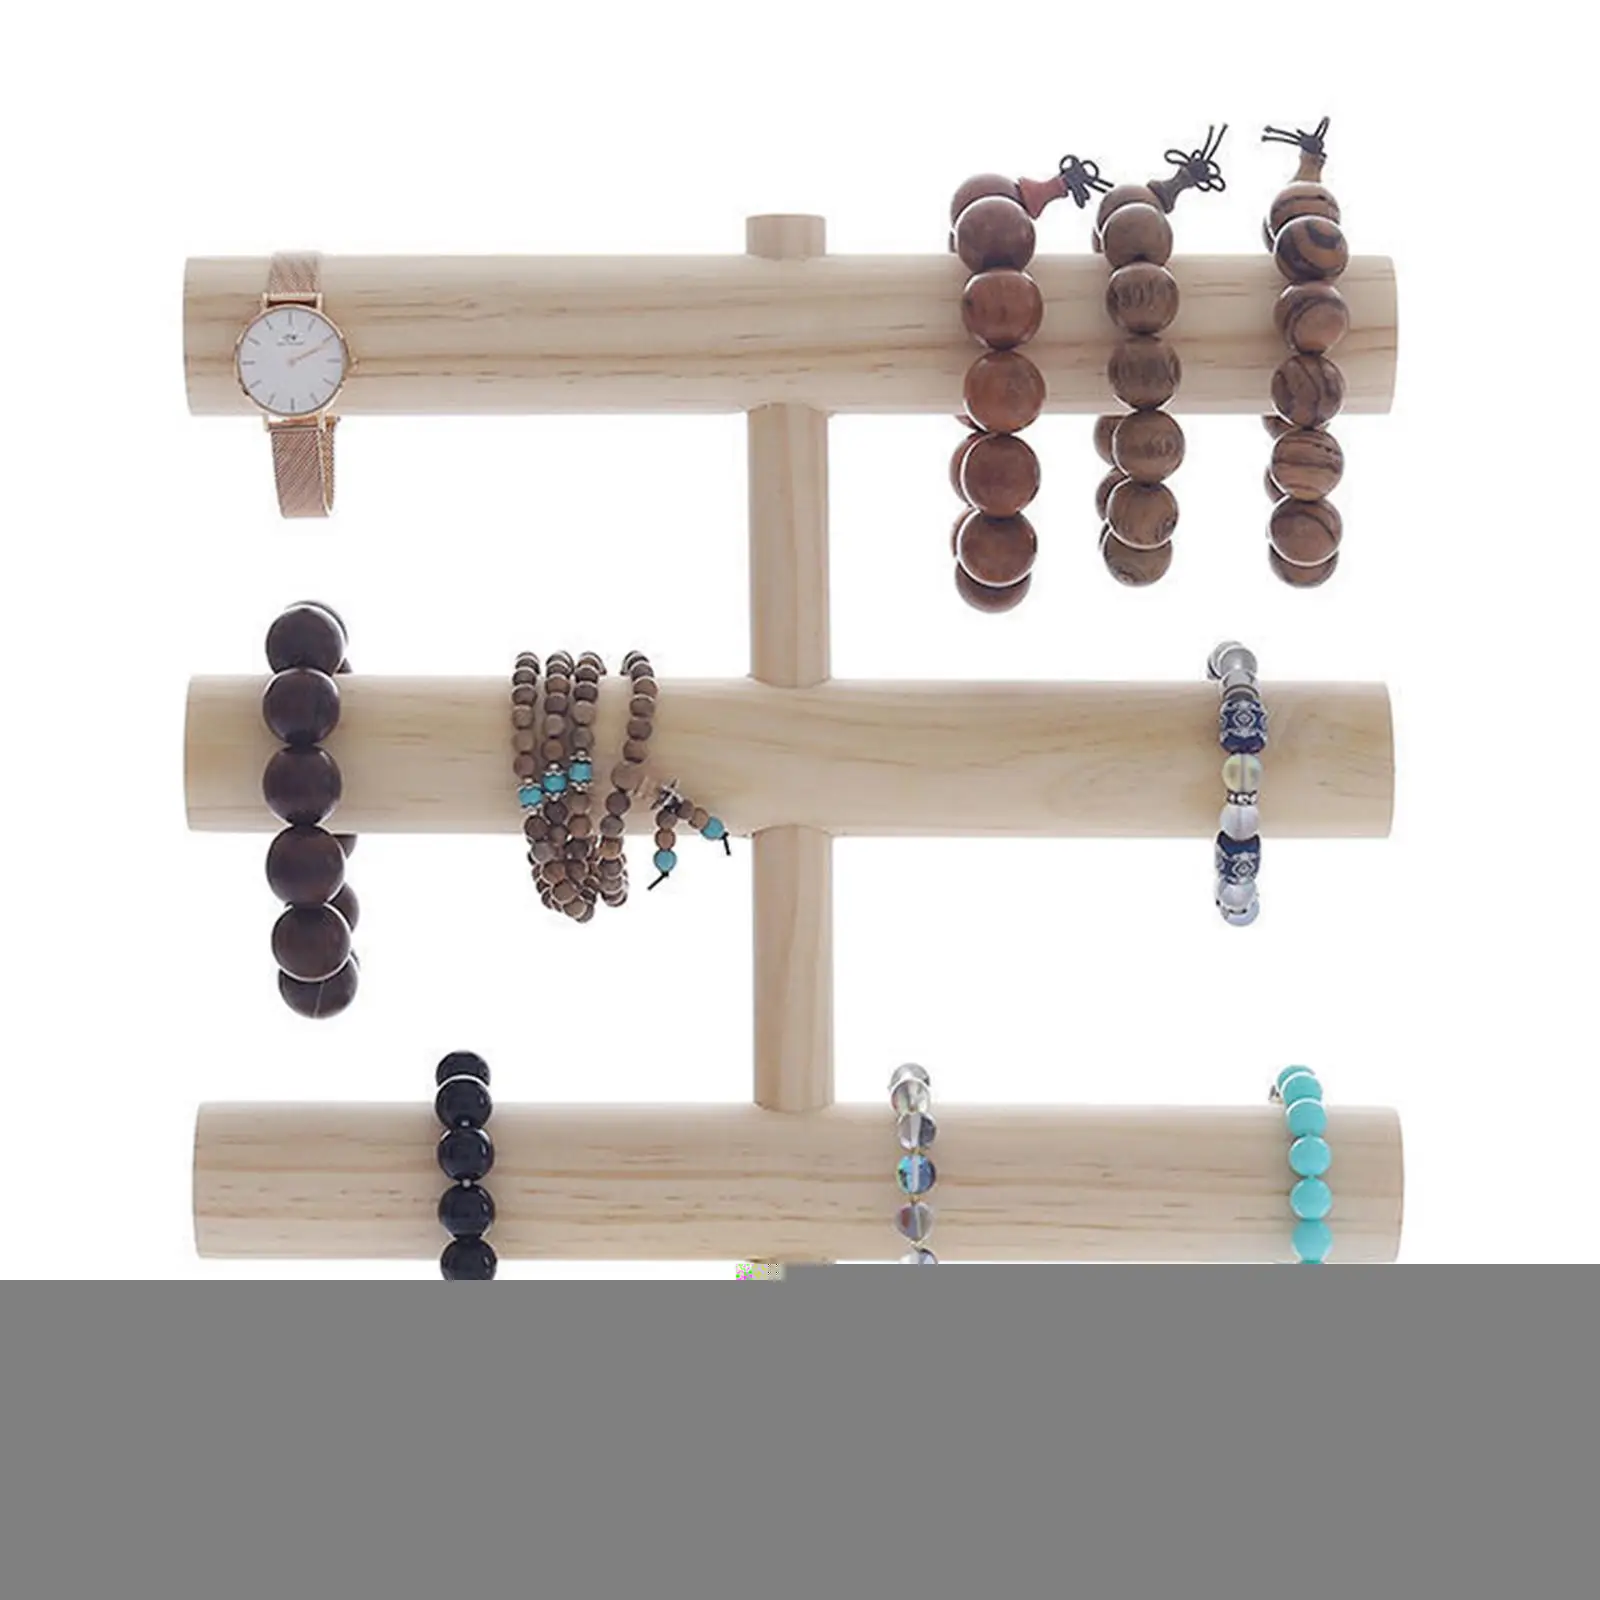 Desktop 3 Tiers Bracelets Display Stand Solid Wood Jewelry Rack for Hair Ropes Bangle Watches Photography Home Office Countertop